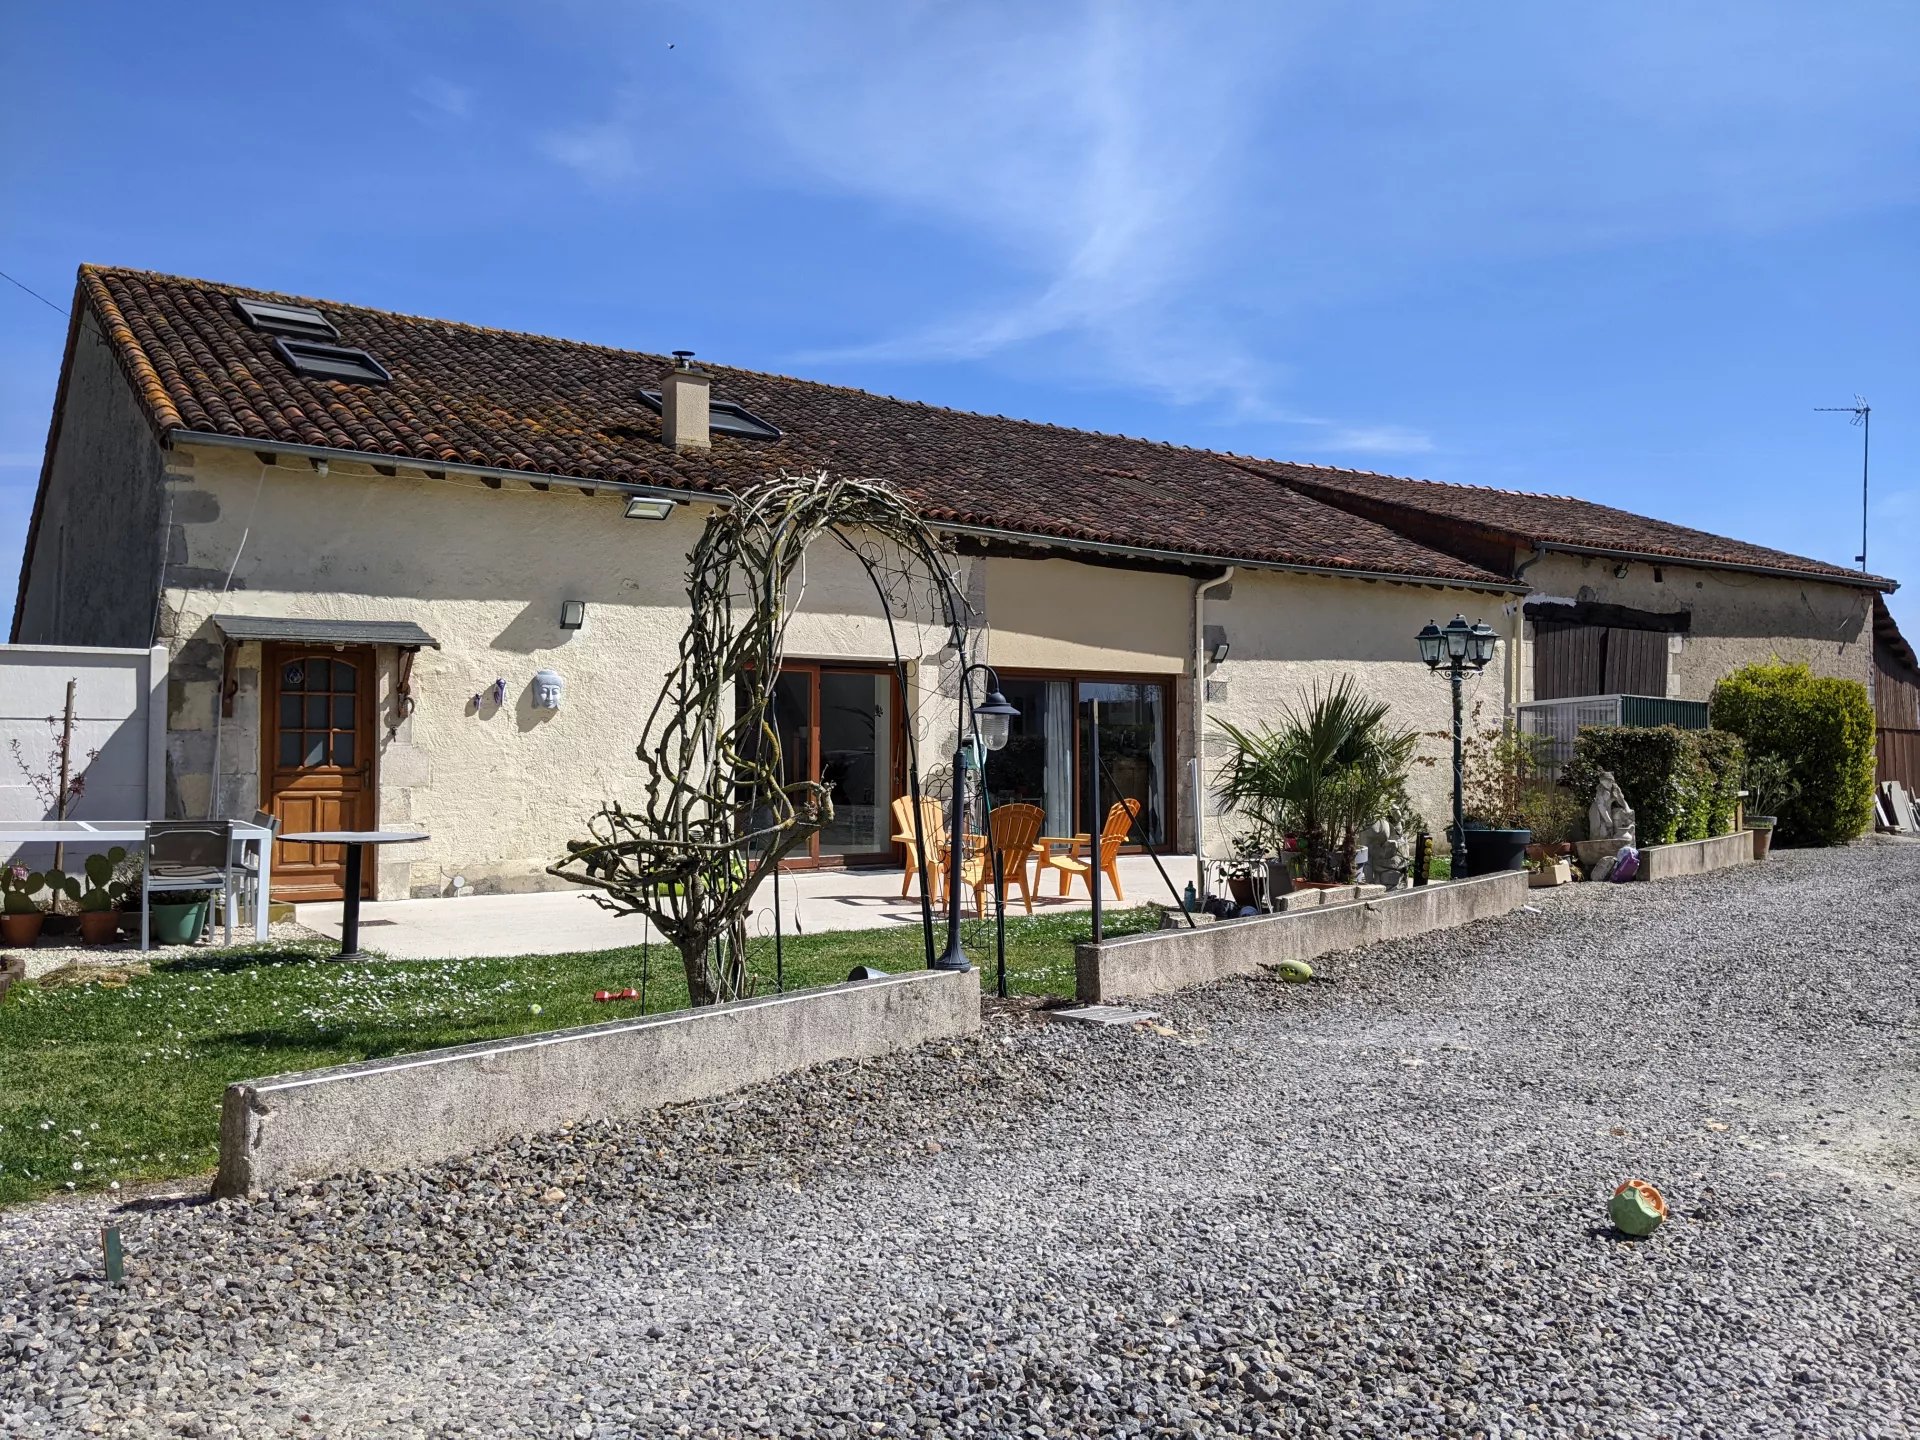 Characterful property on the outskirts of Montmorillon